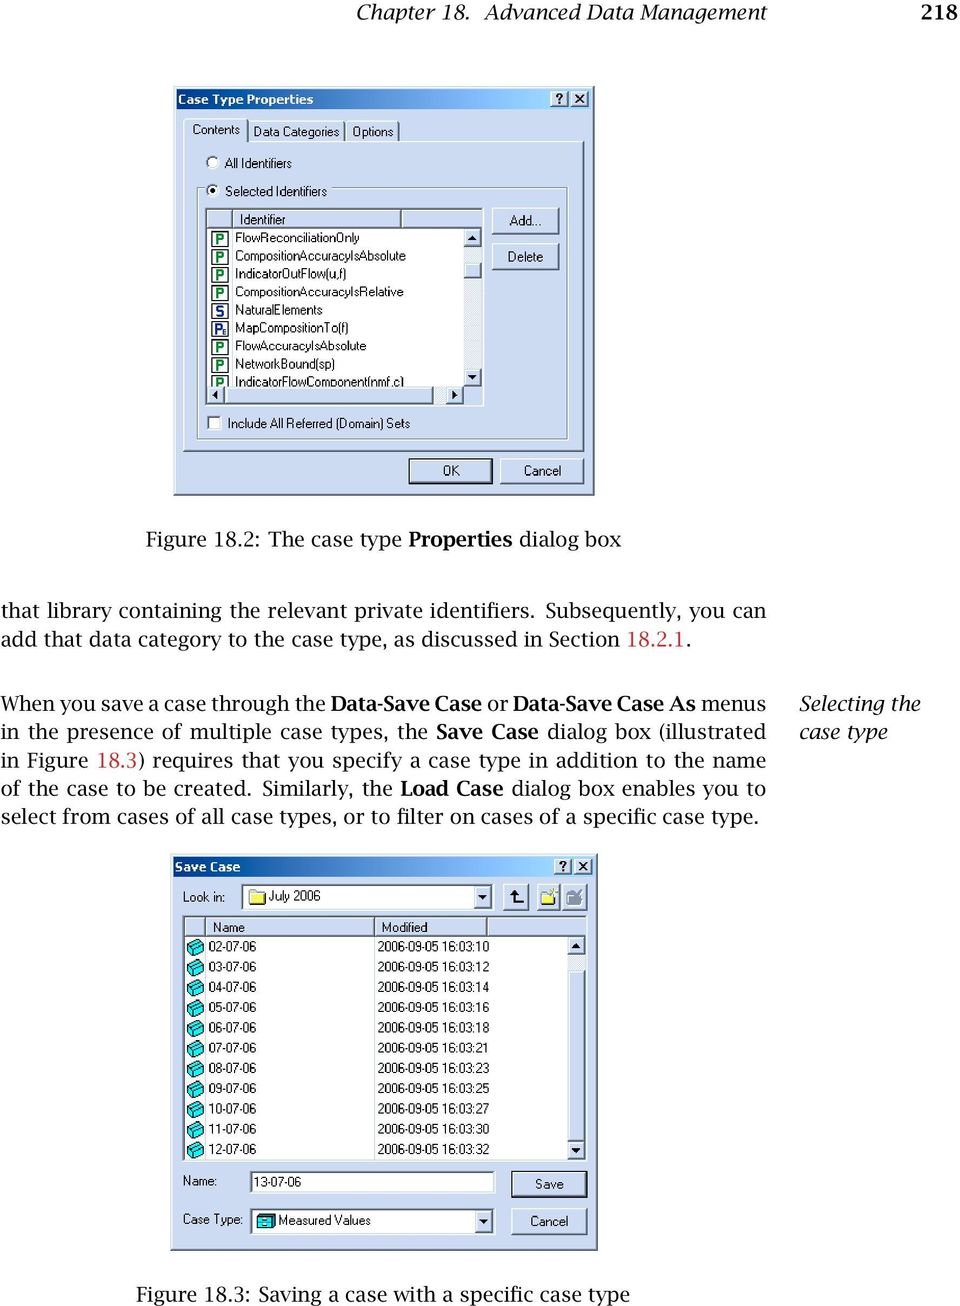 .2.1. When you save a case through the Data-Save Case or Data-Save Case As menus in the presence of multiple case types, the Save Case dialog box (illustrated in Figure 18.